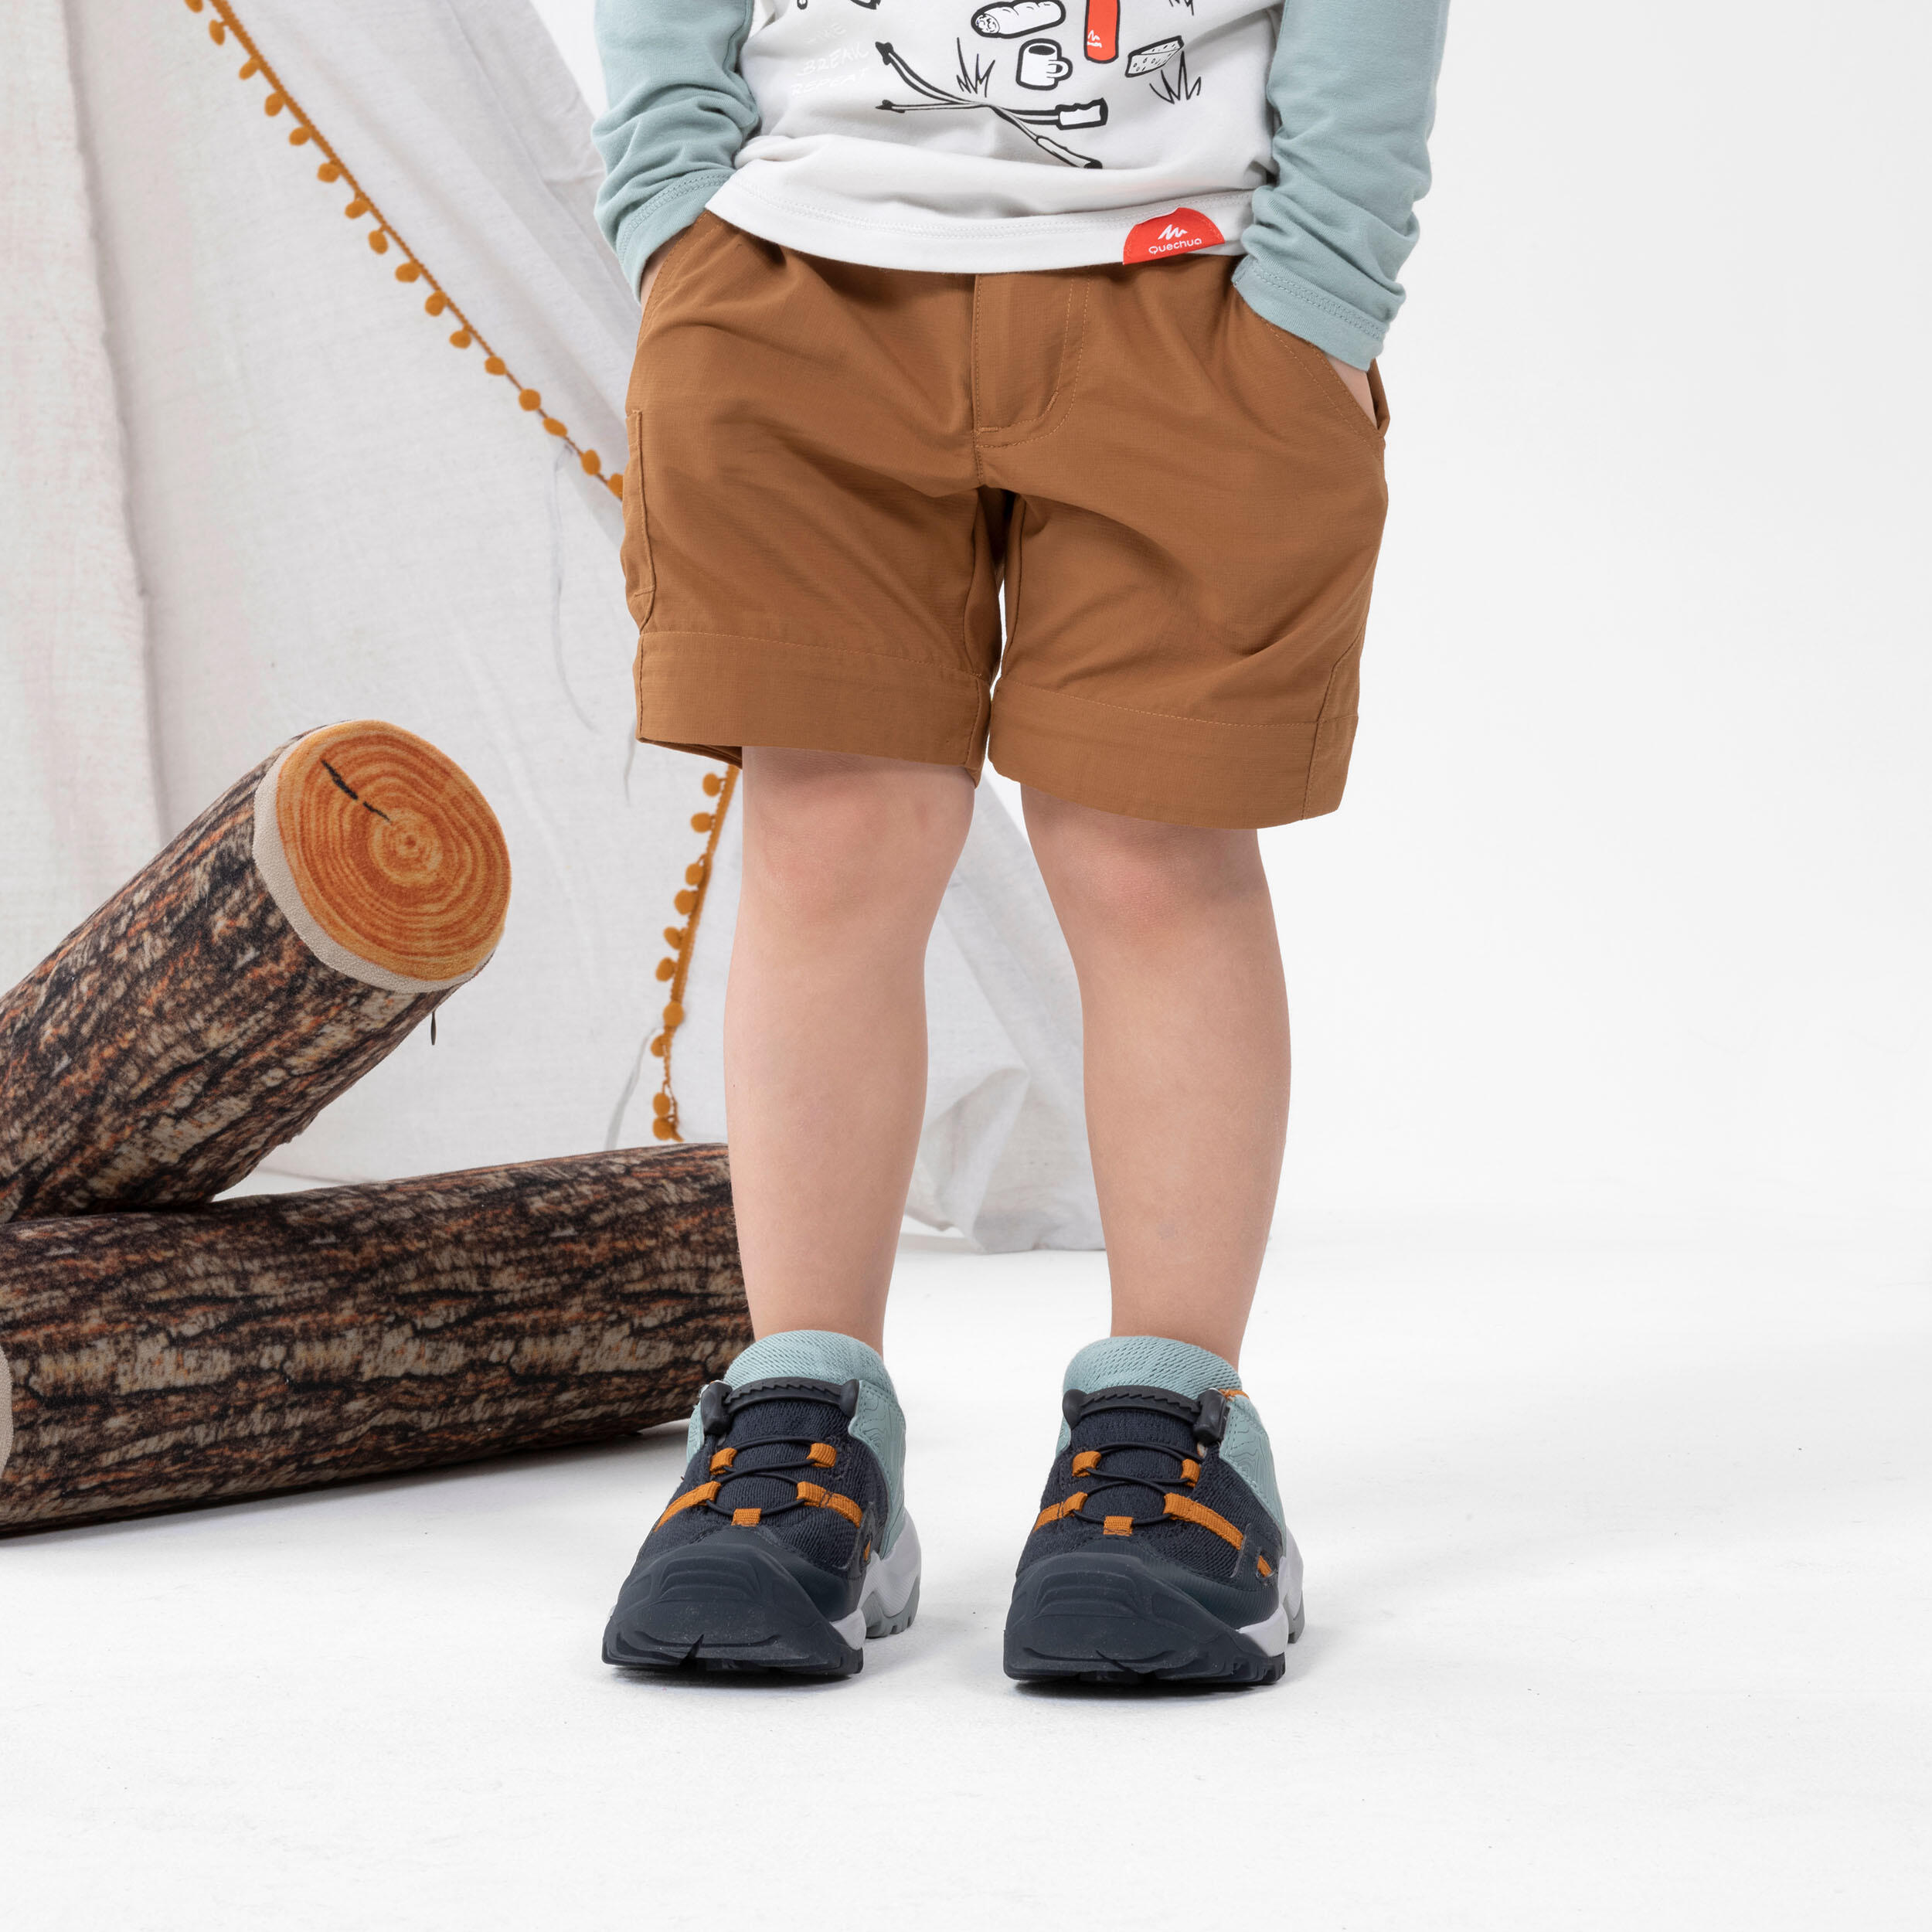 Kids' Hiking Zip-Off Trousers MH500 2-6 Years 5/8